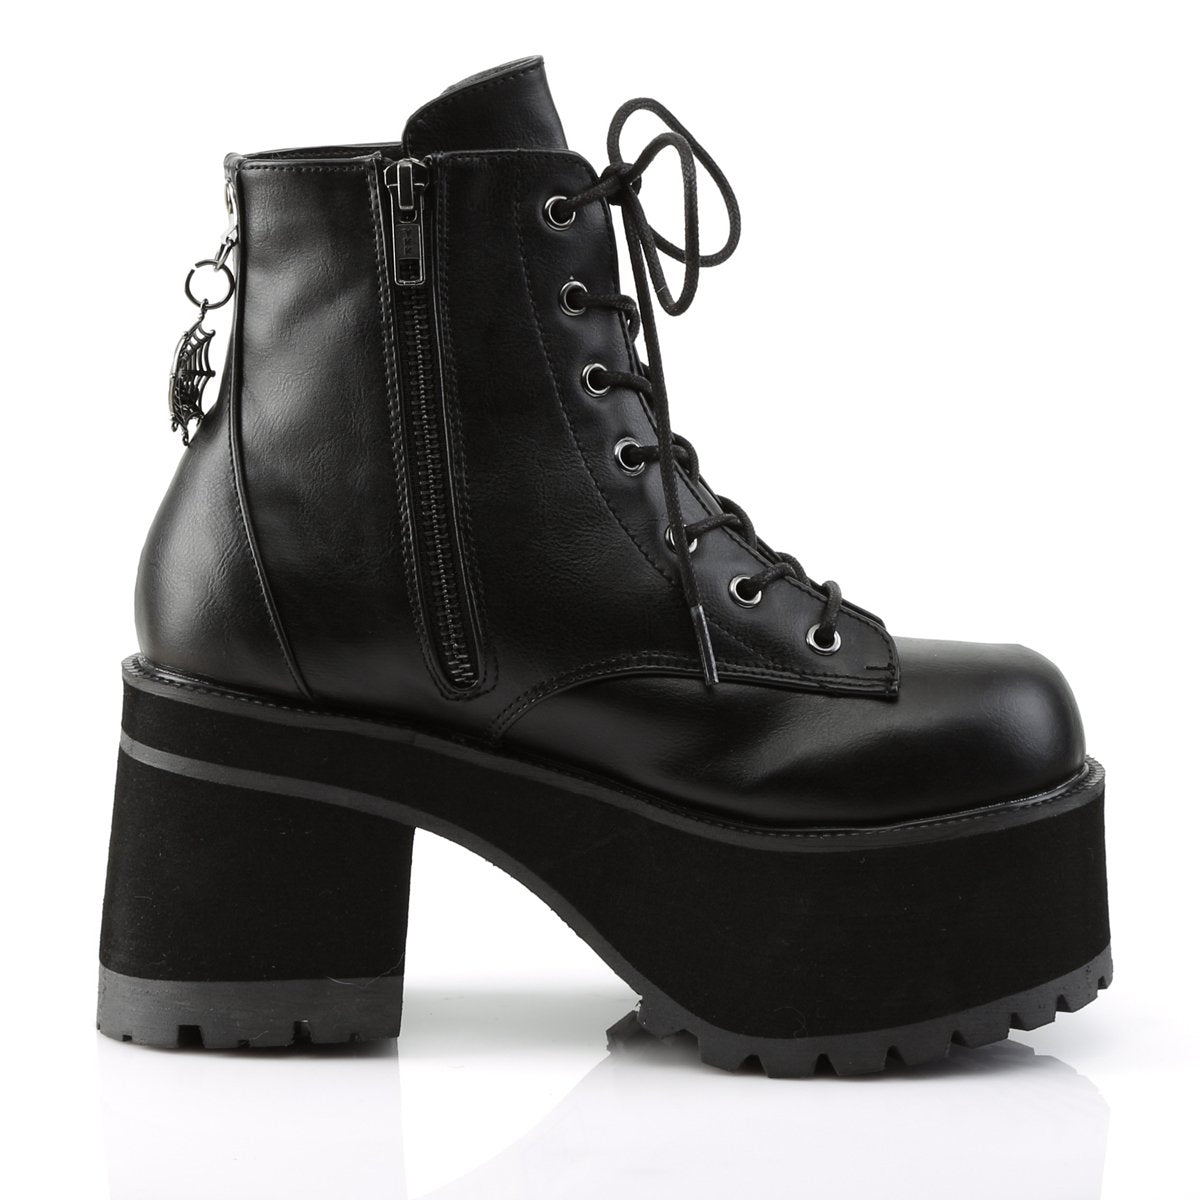 Demonia Ranger-105 Women's Ankle Boots | Buy Sexy Shoes at Shoefreaks.ca